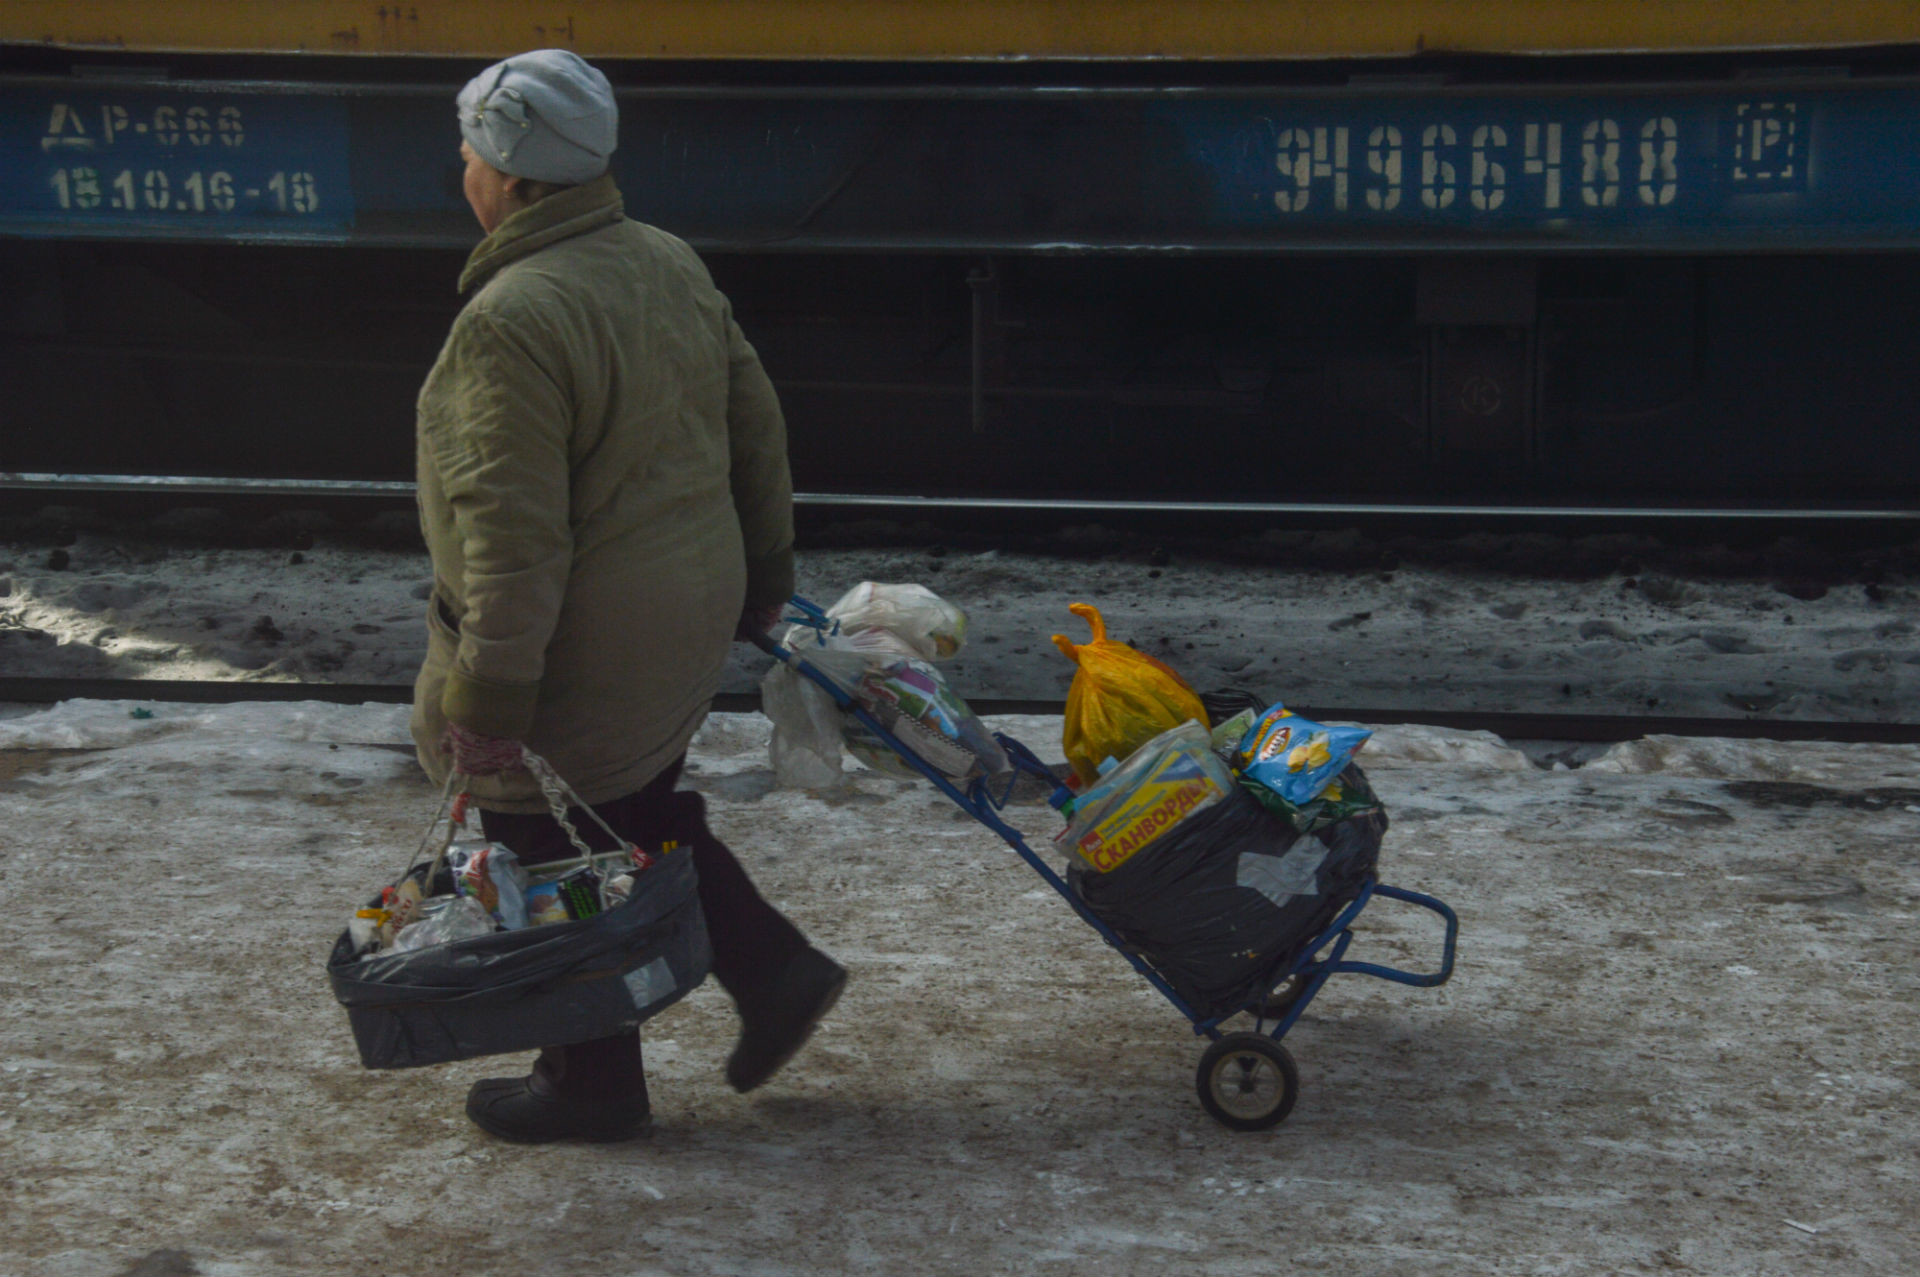 Babushkas get ready to sell their merchandise as they wait for passengers to arrive on the next train.